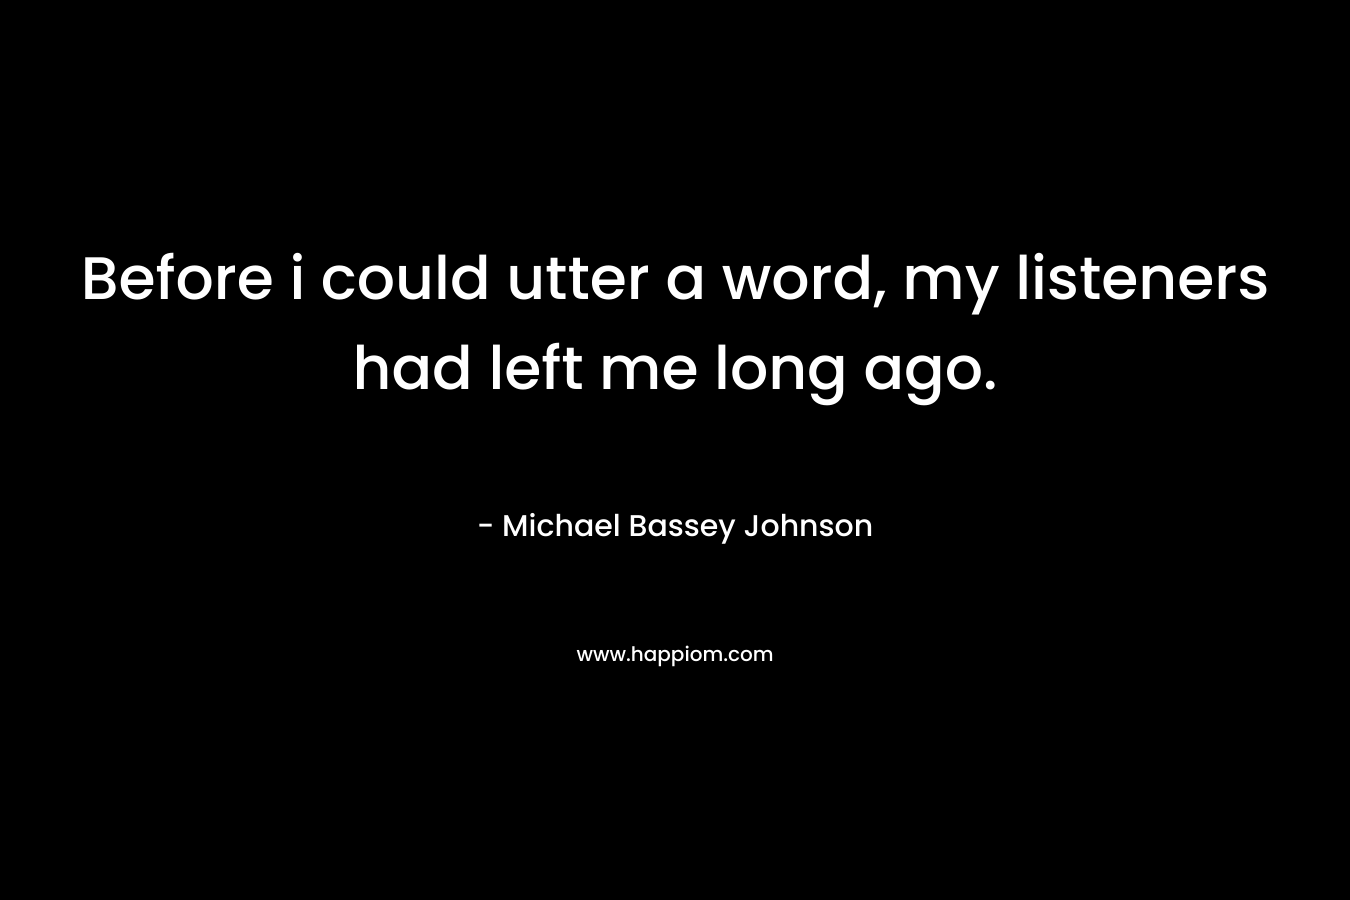 Before i could utter a word, my listeners had left me long ago. – Michael Bassey Johnson